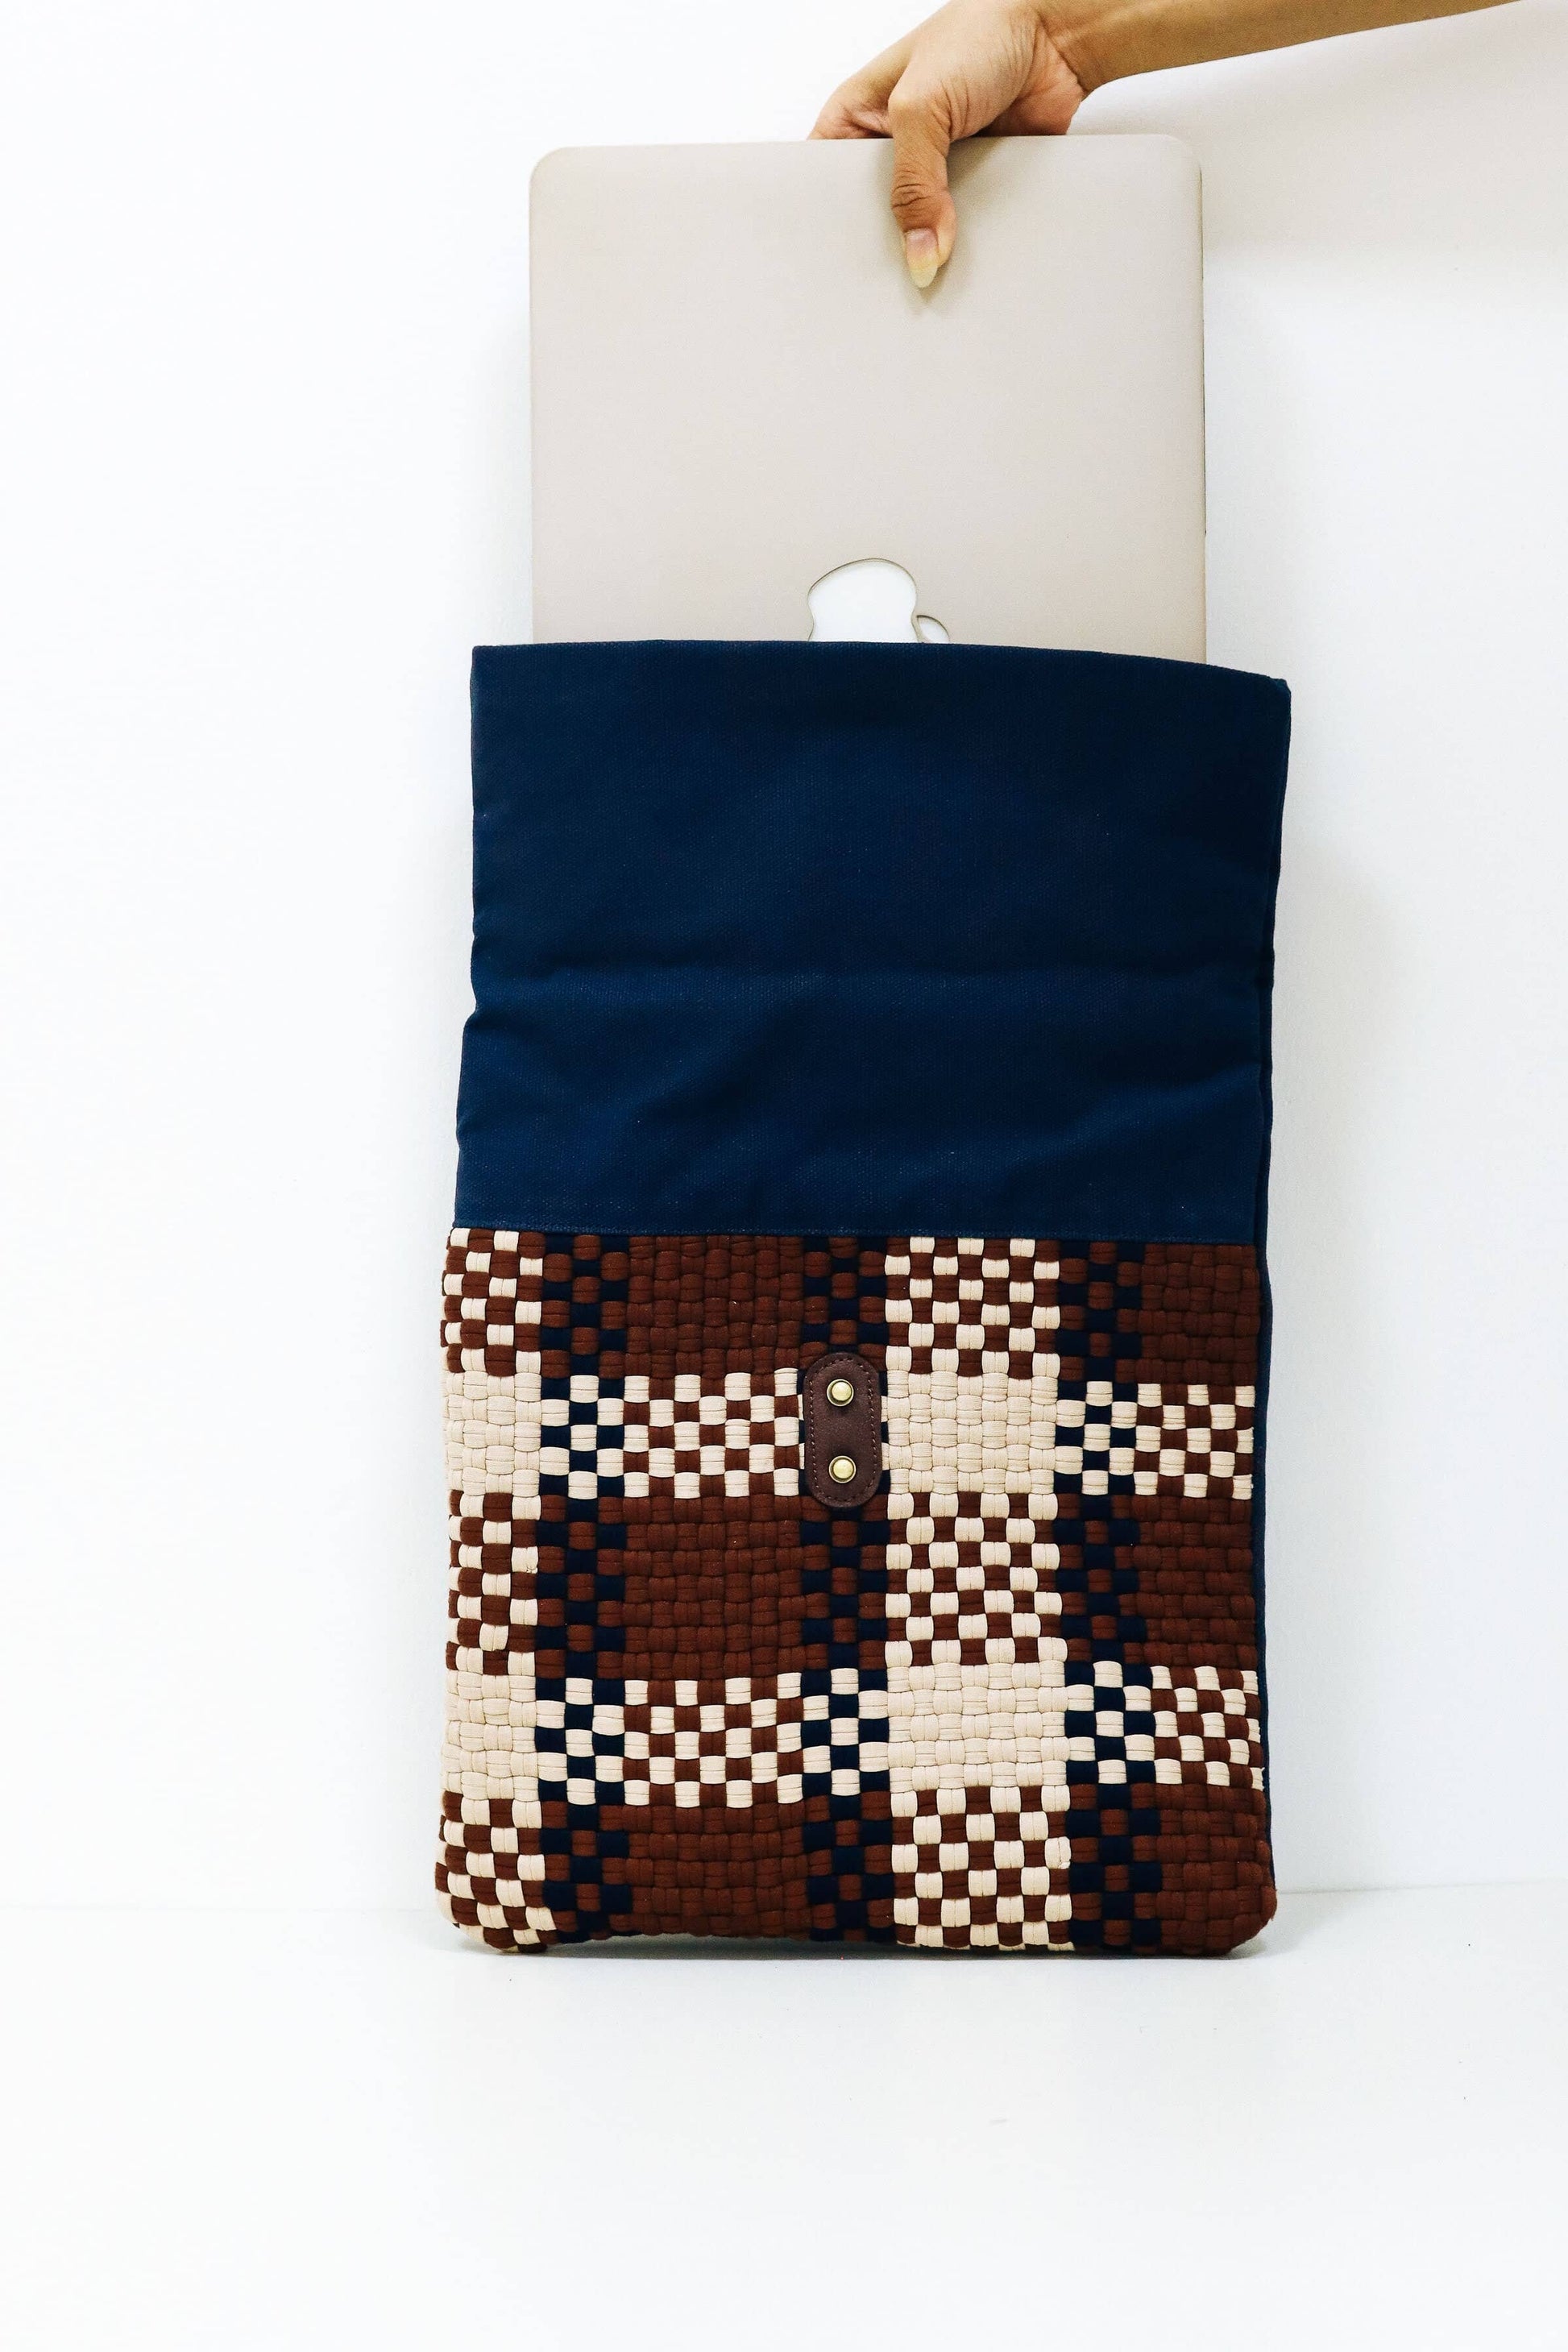 Charlie Laptop Sleeve - Brown & Navy Fashion Rags2Riches